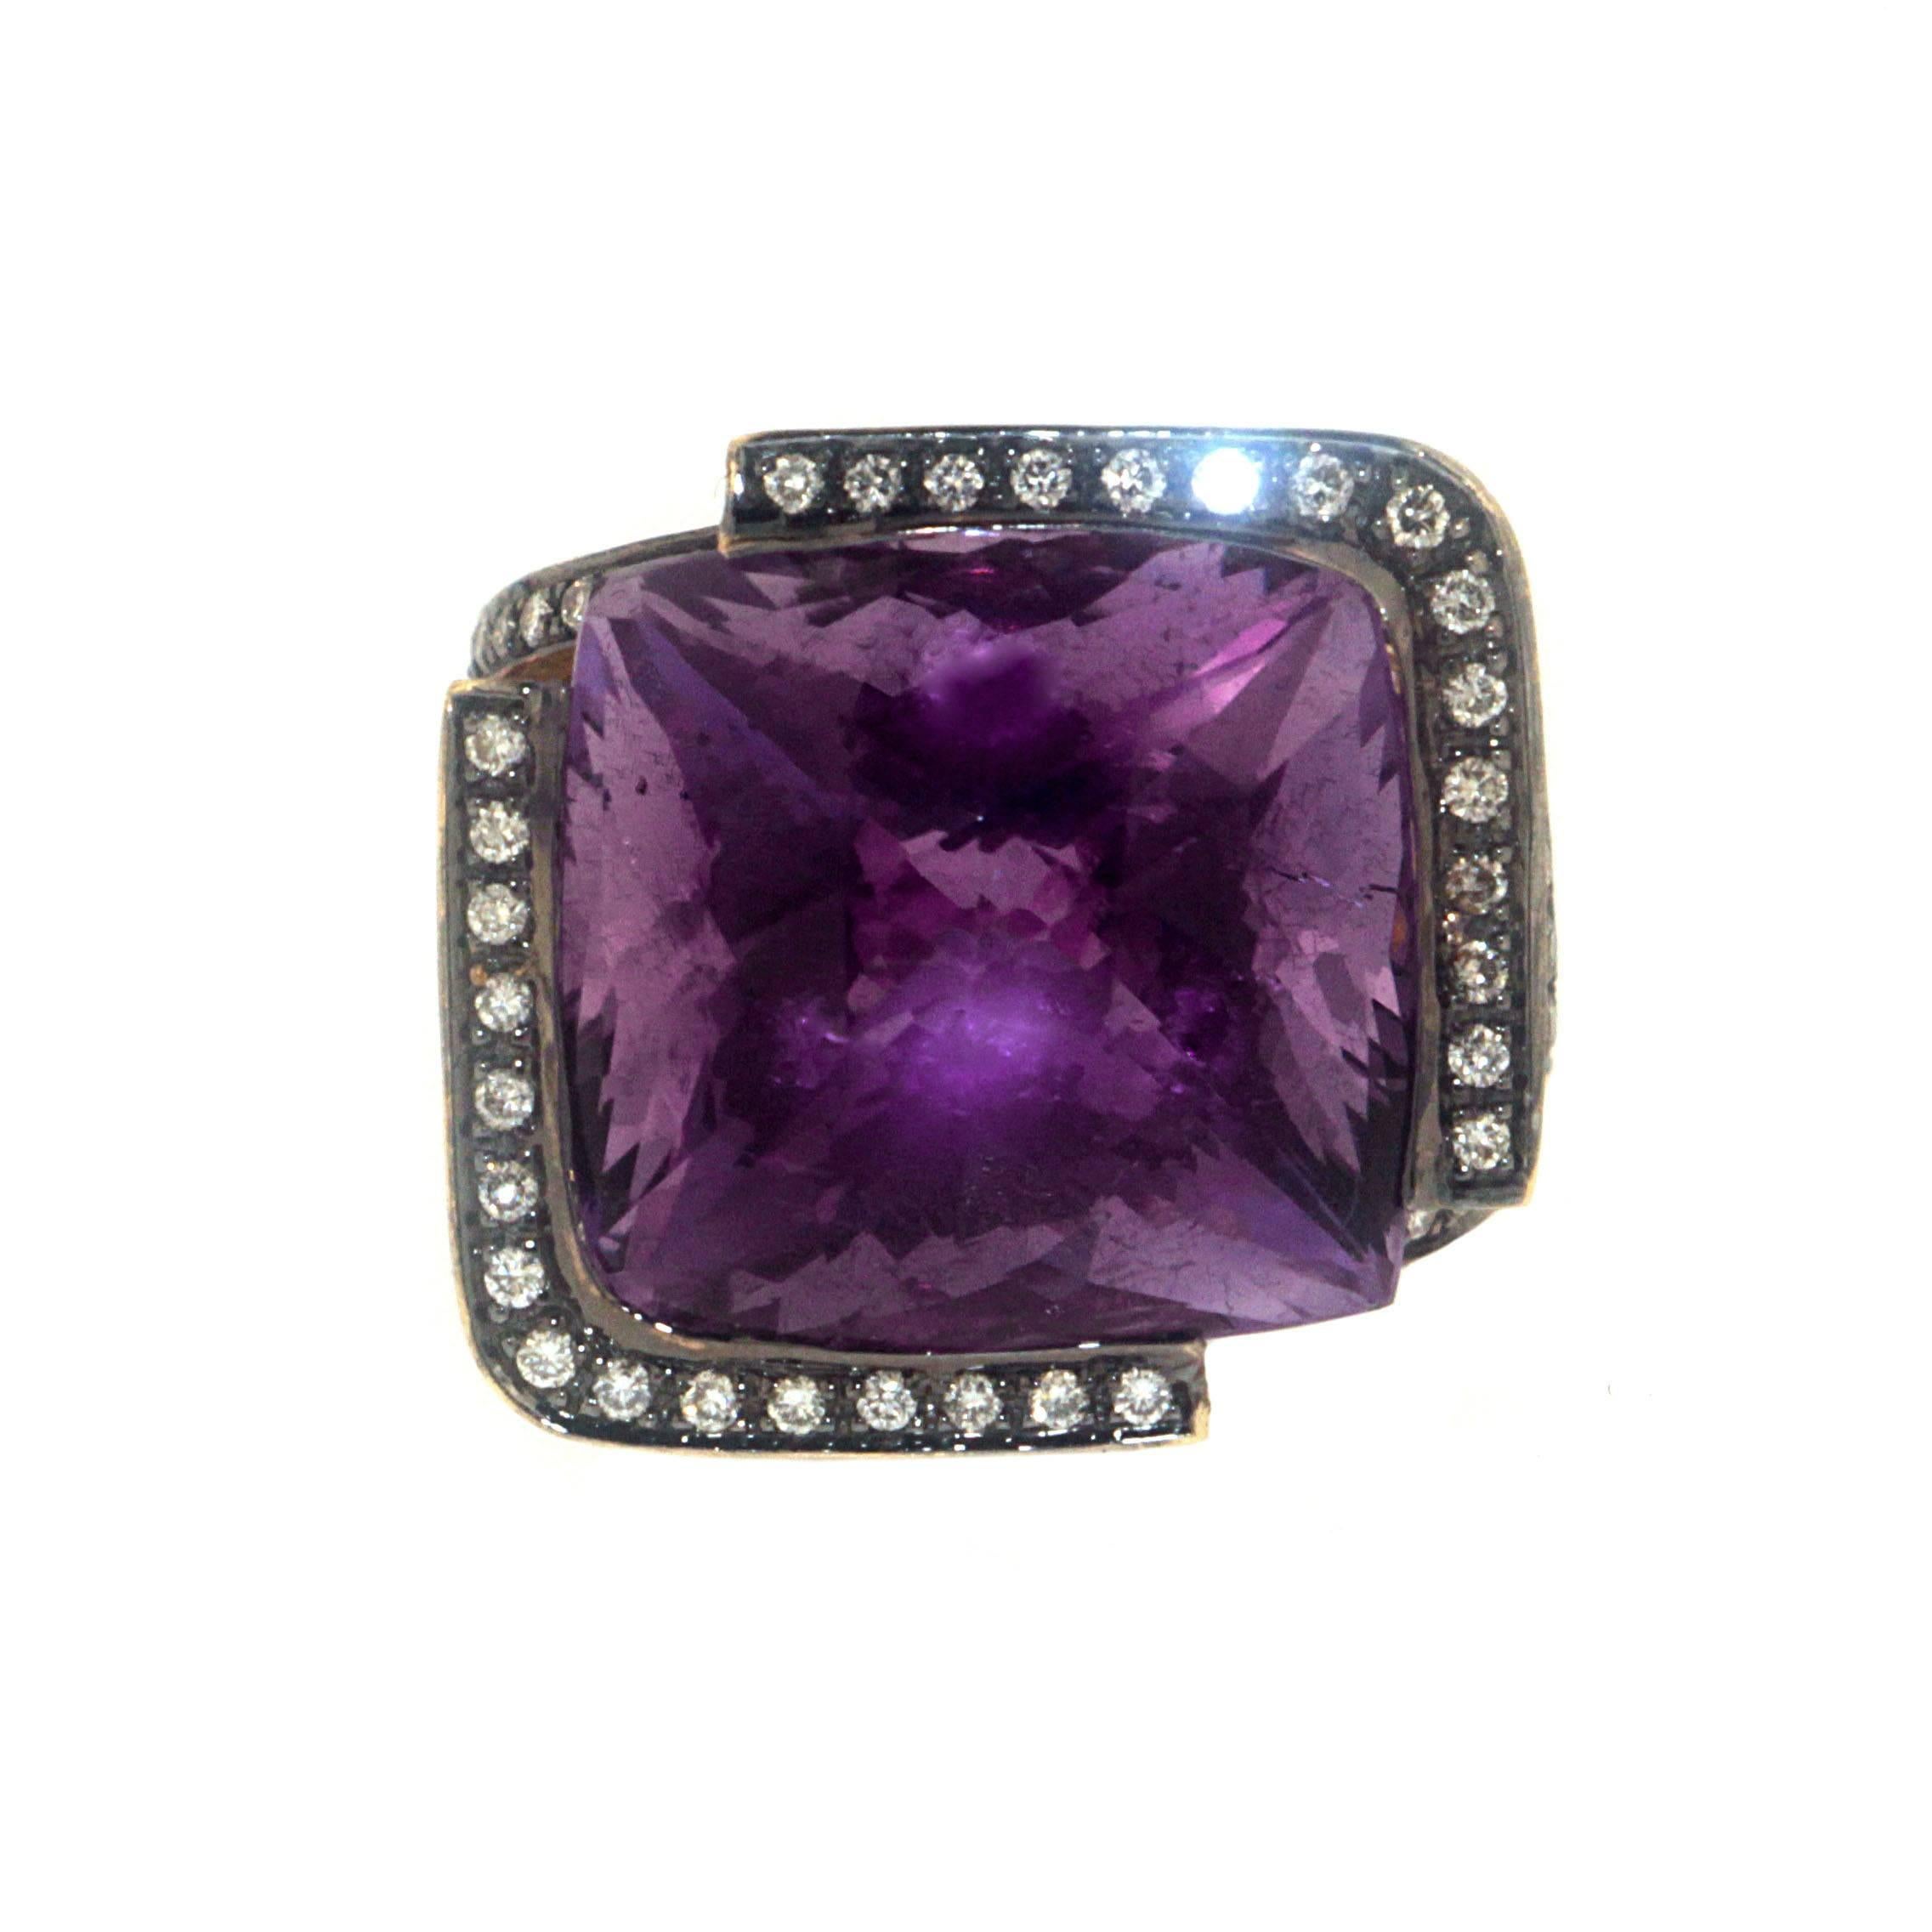 Some say a skyward bridge awaits our stroll to complete harmony with nature. One thing is certain, this jewelry ascension will result in a personal utopia.

Presenting the Utopia ring, a Zorab Creation. Bathed in a majestic 20.13 carats of amethyst